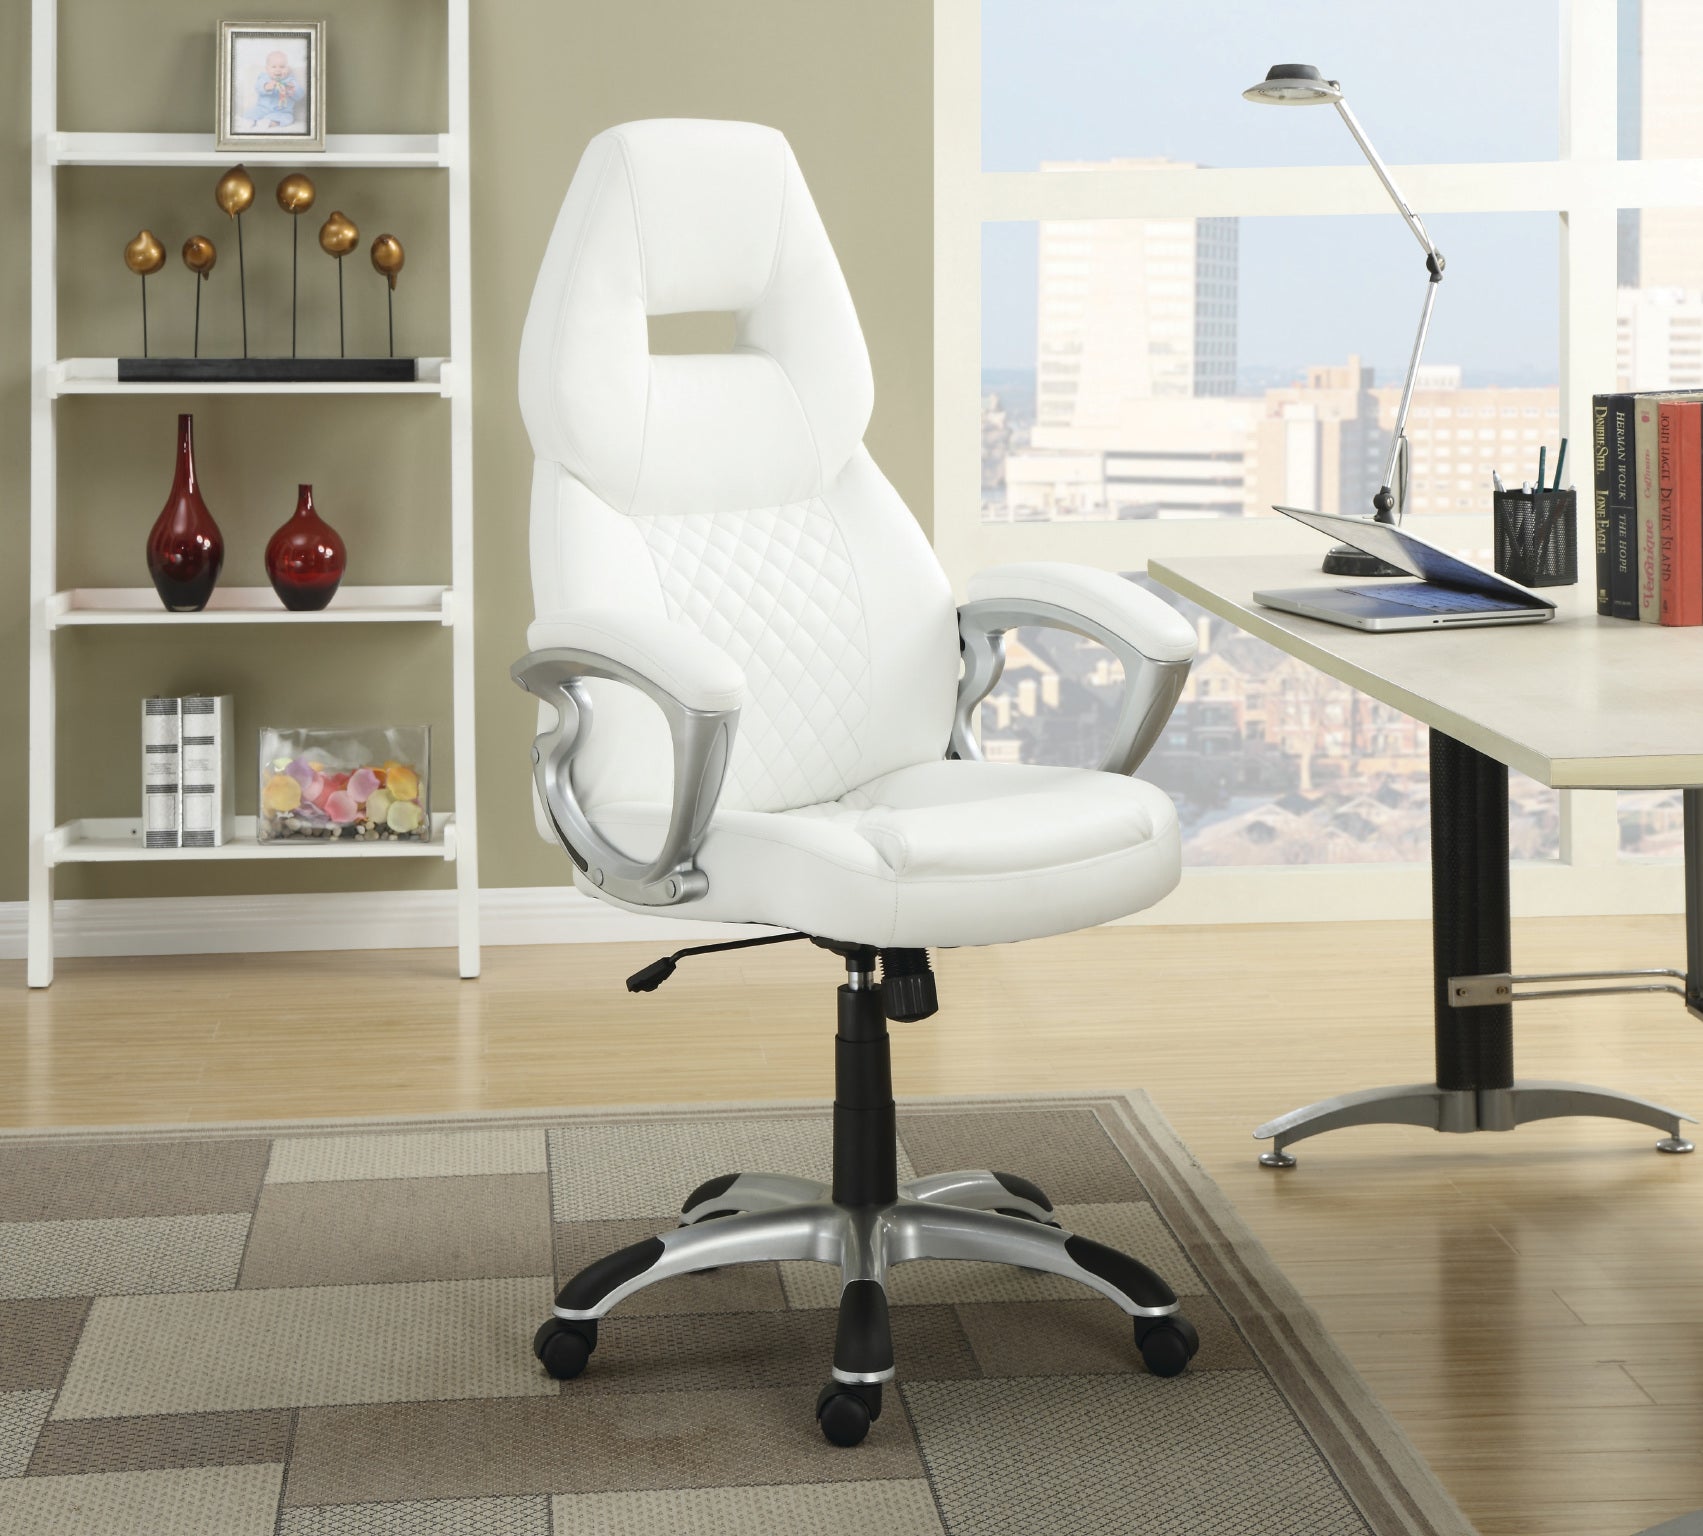 OF2159B - Office Chair